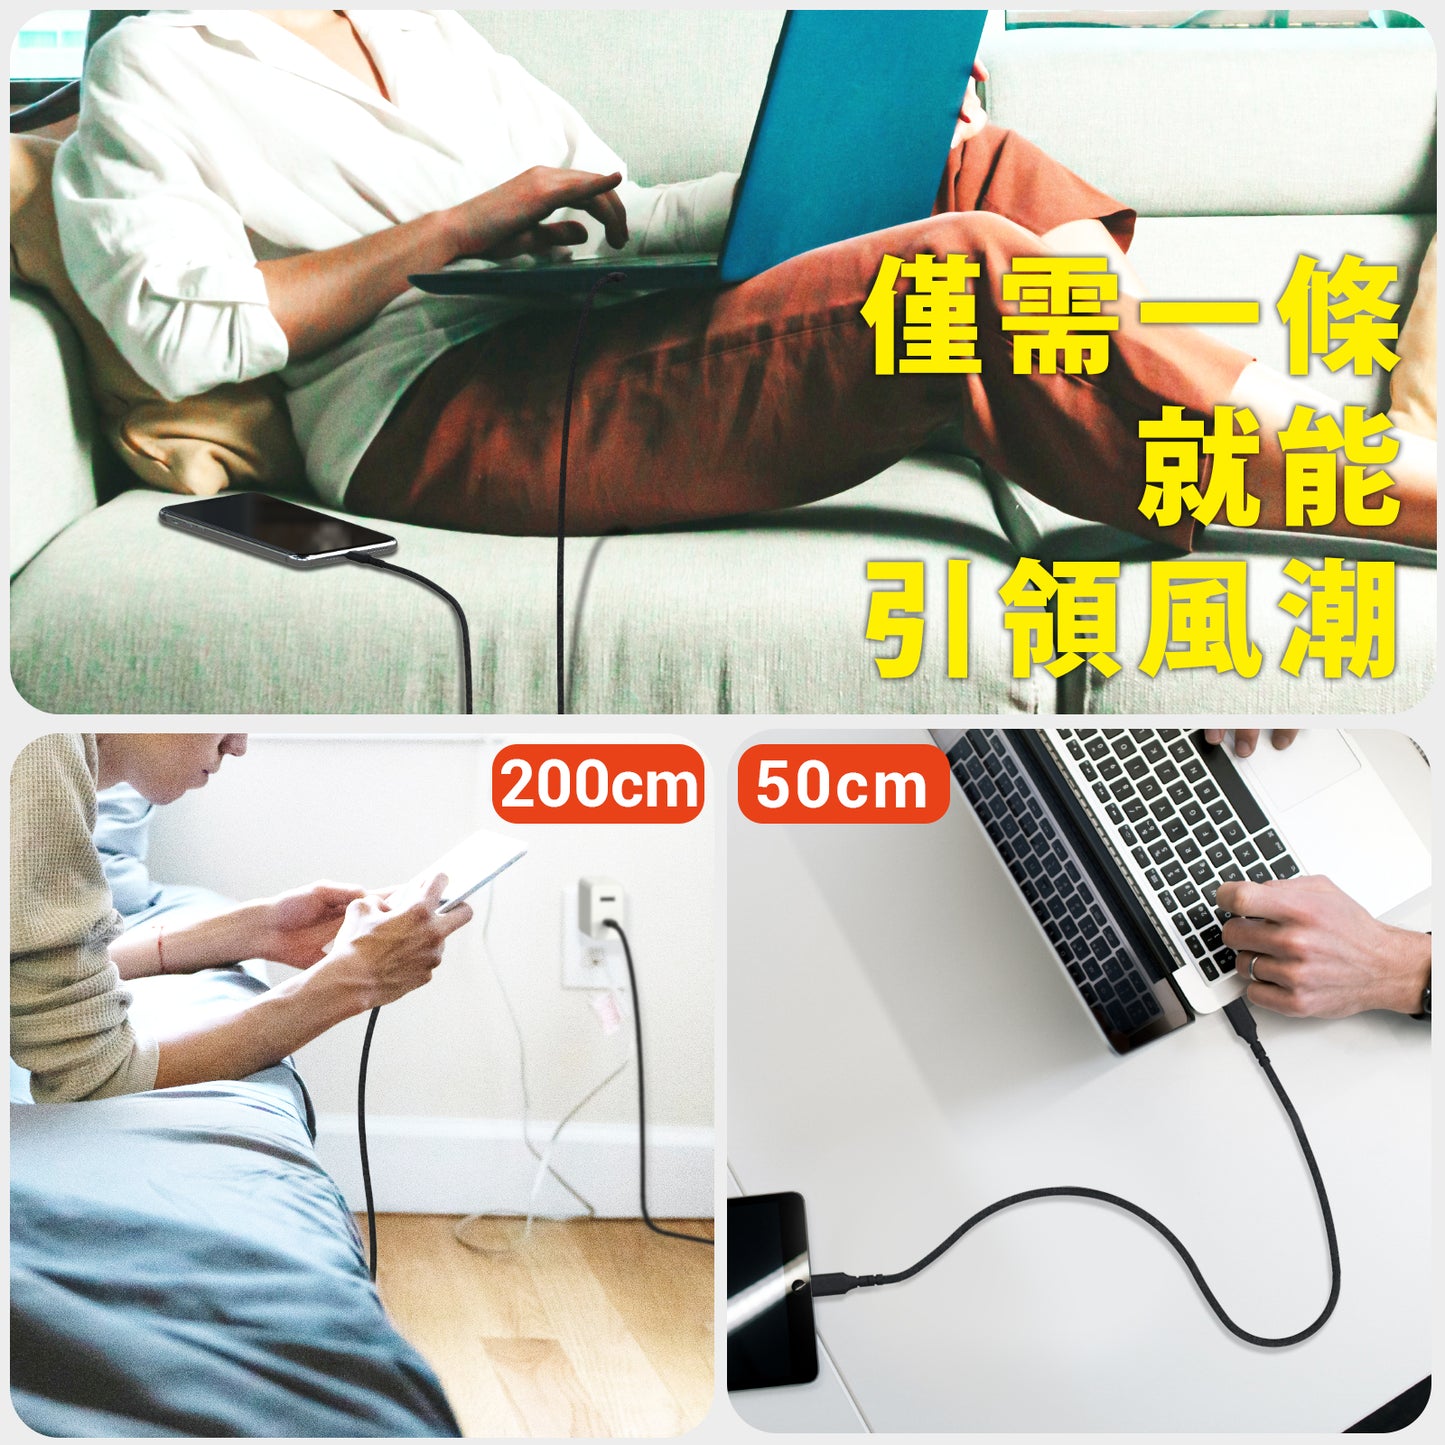 GaN is so fast! USB-C charging cable 240W PD3.1 (200cm)